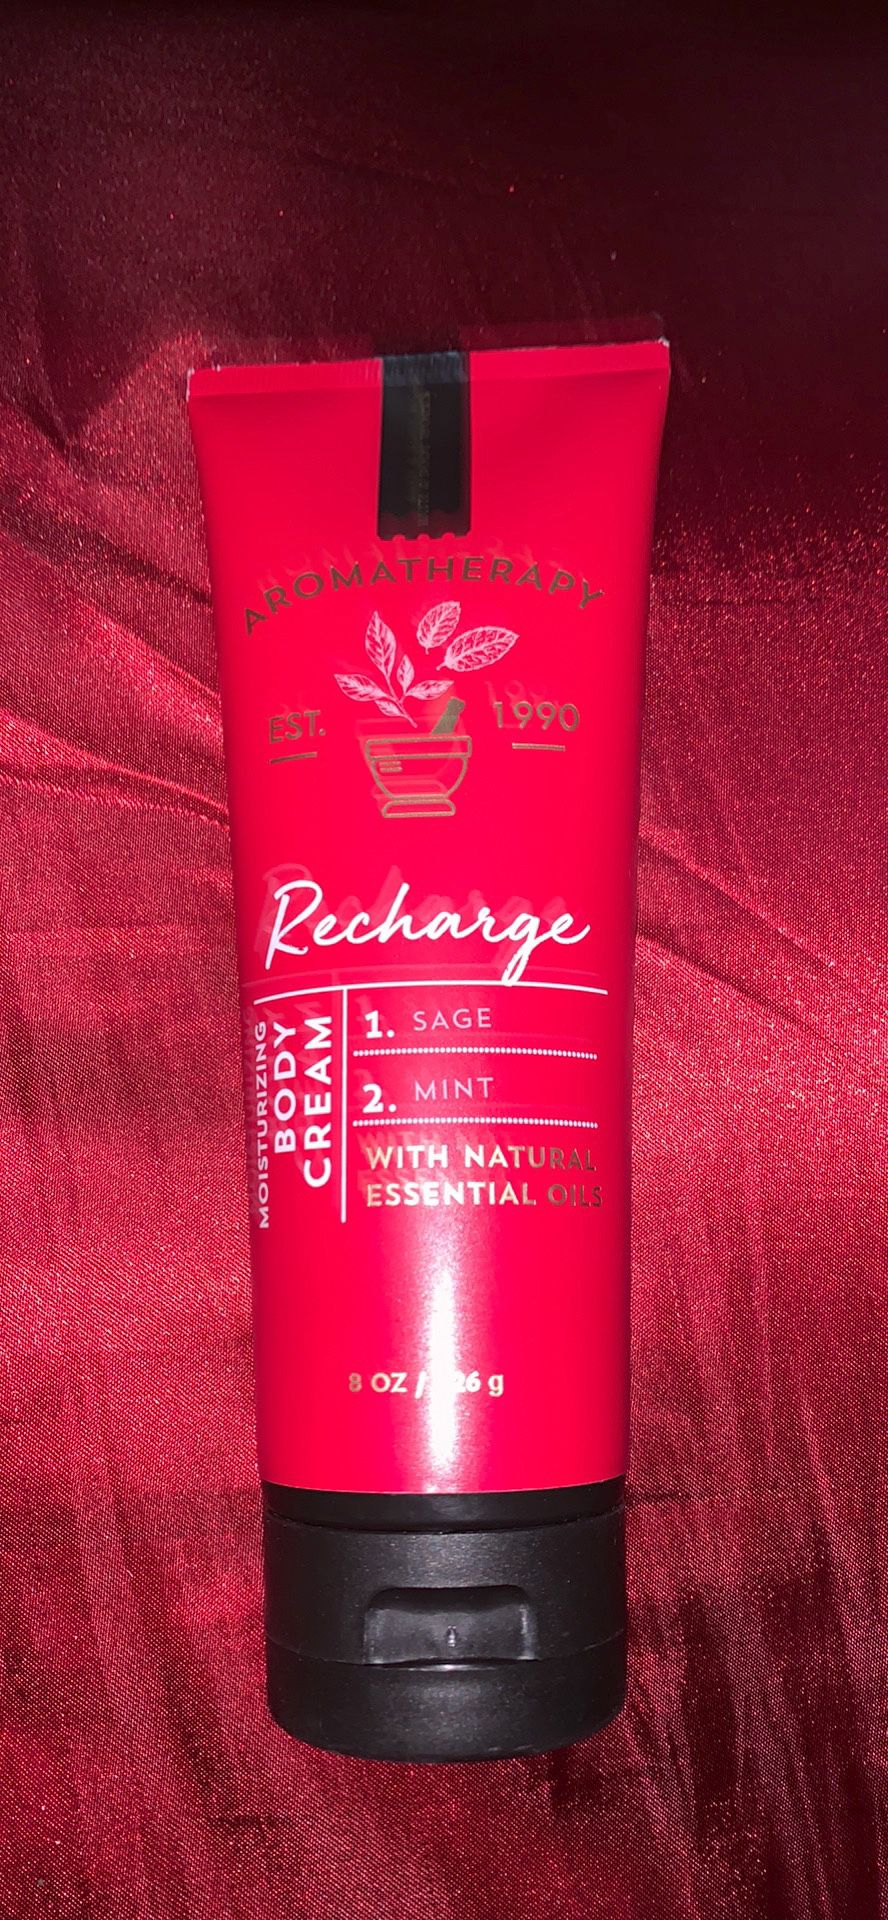 Recharge body cream bath and body works